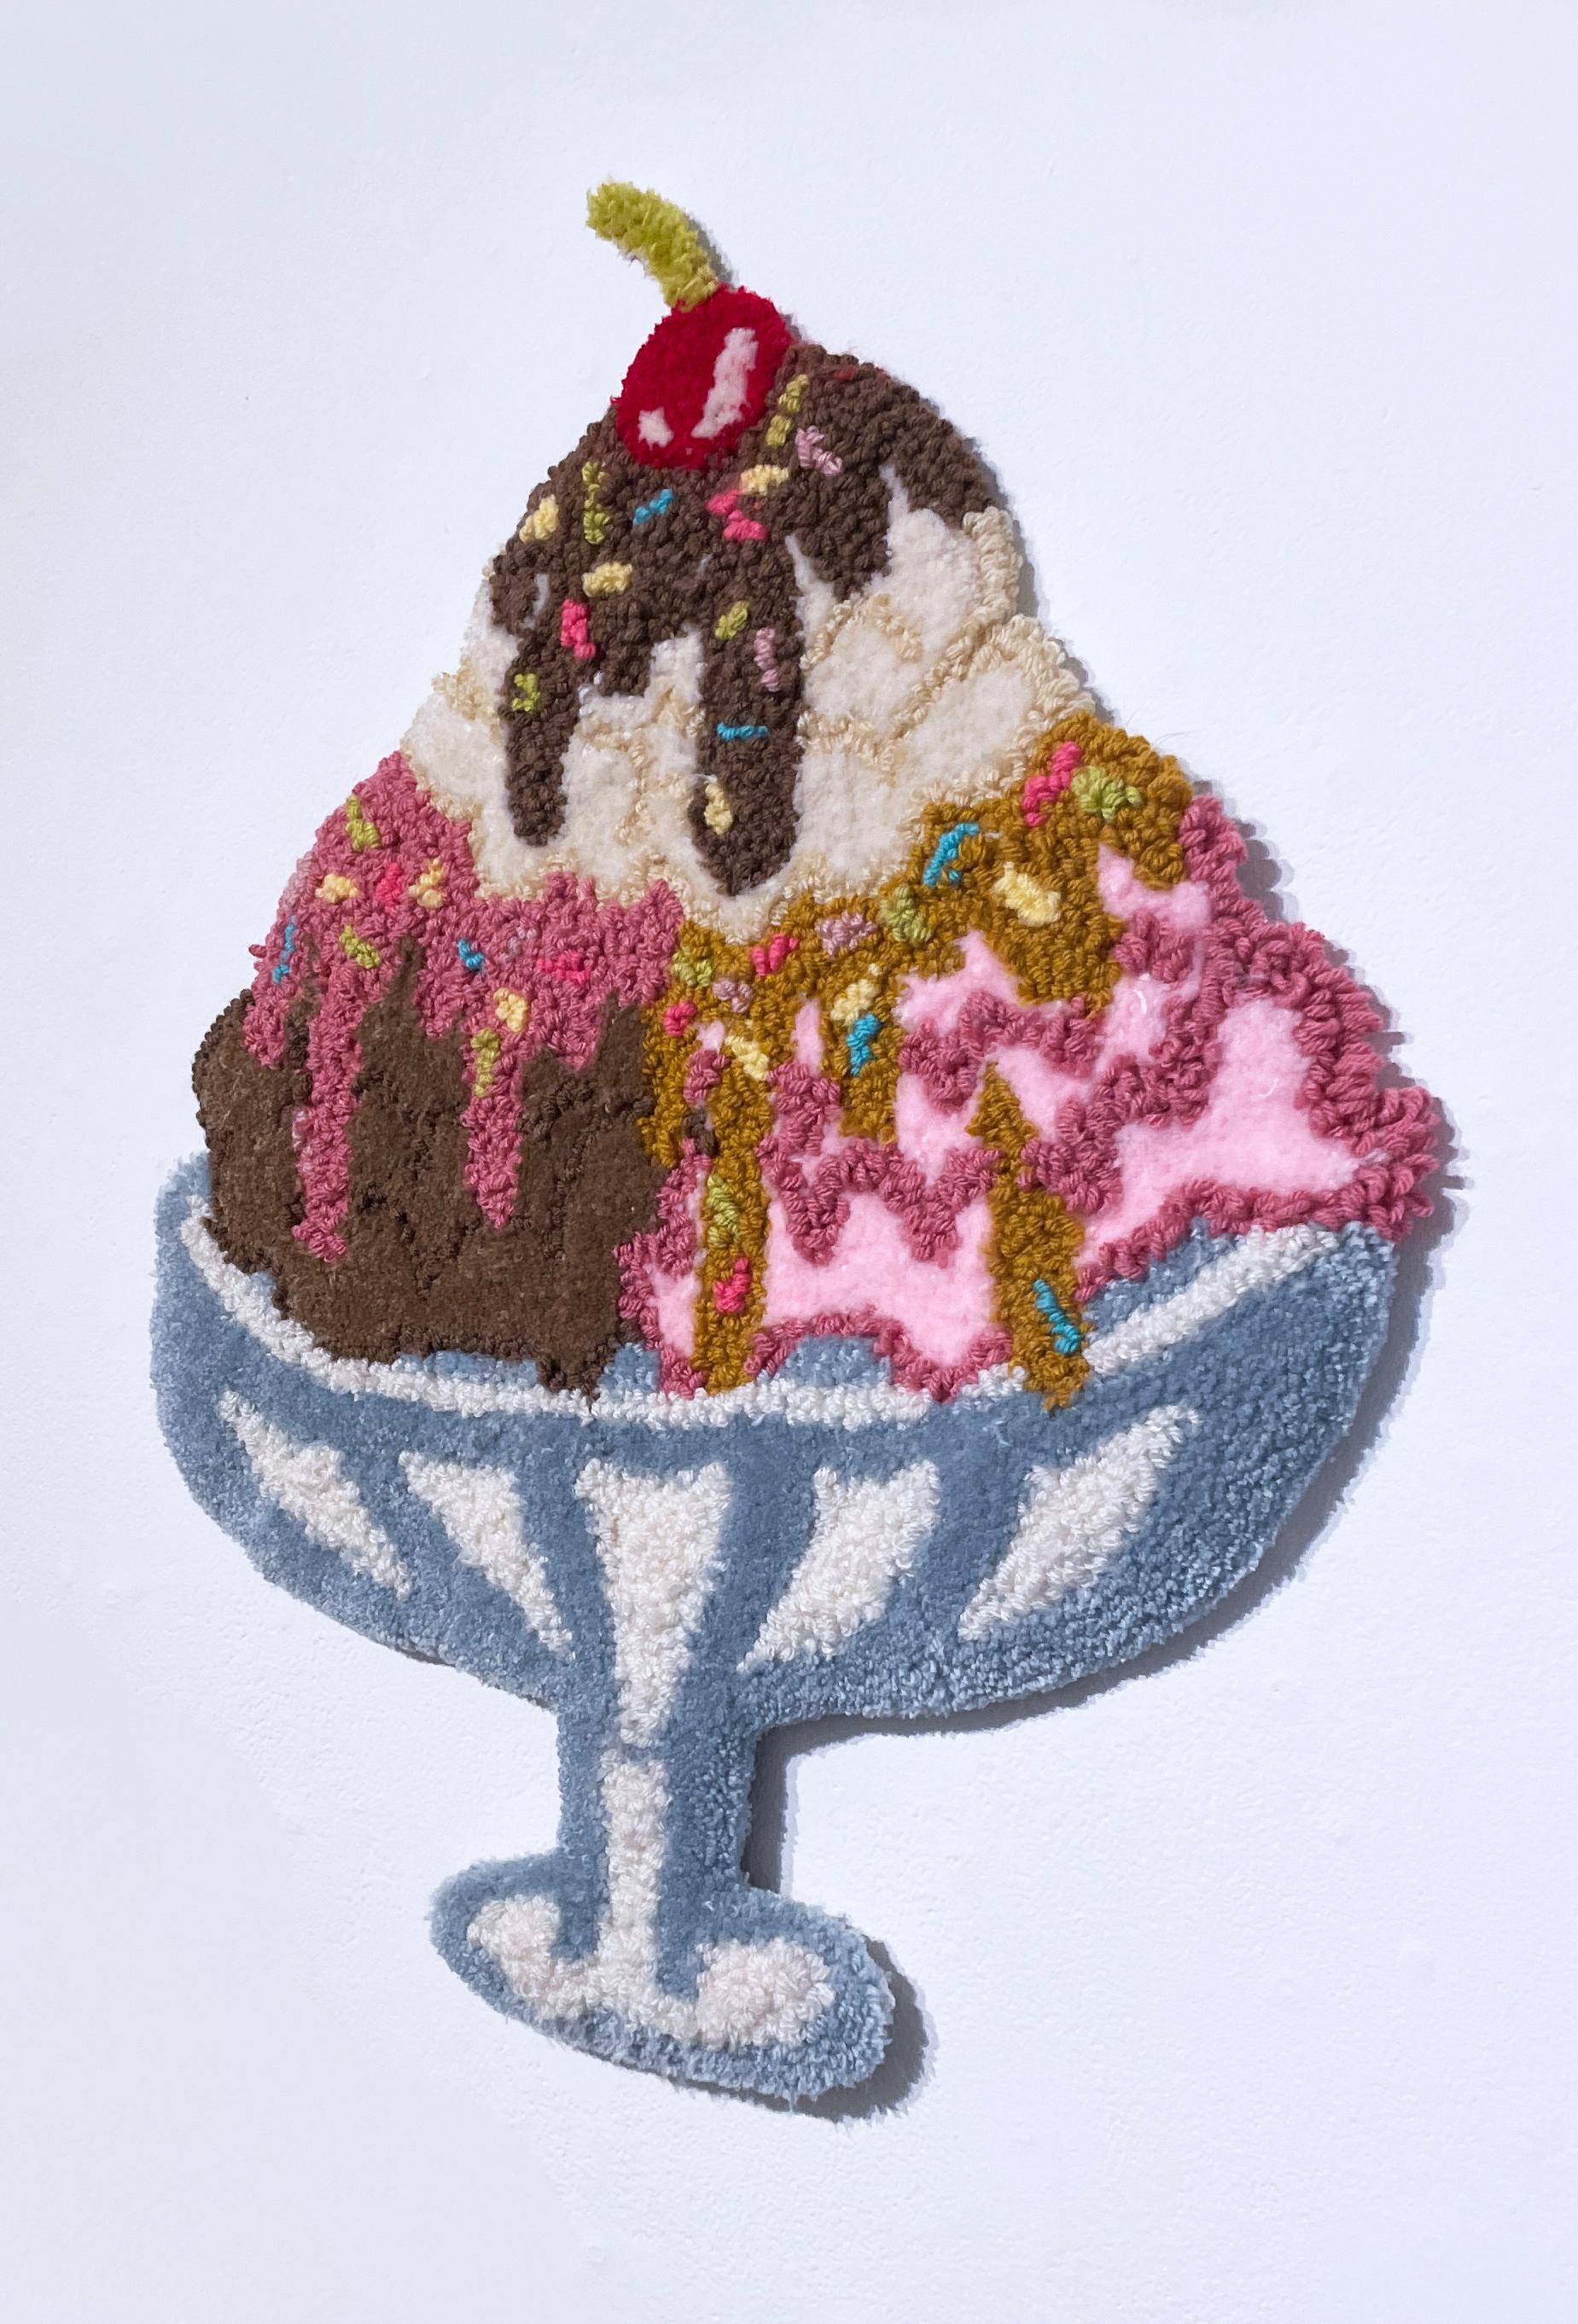 Bake Sale: Ice Cream (20232), tufted wall art, textile, fiber, yarn, pink, soft - Contemporary Sculpture by SarahGrace